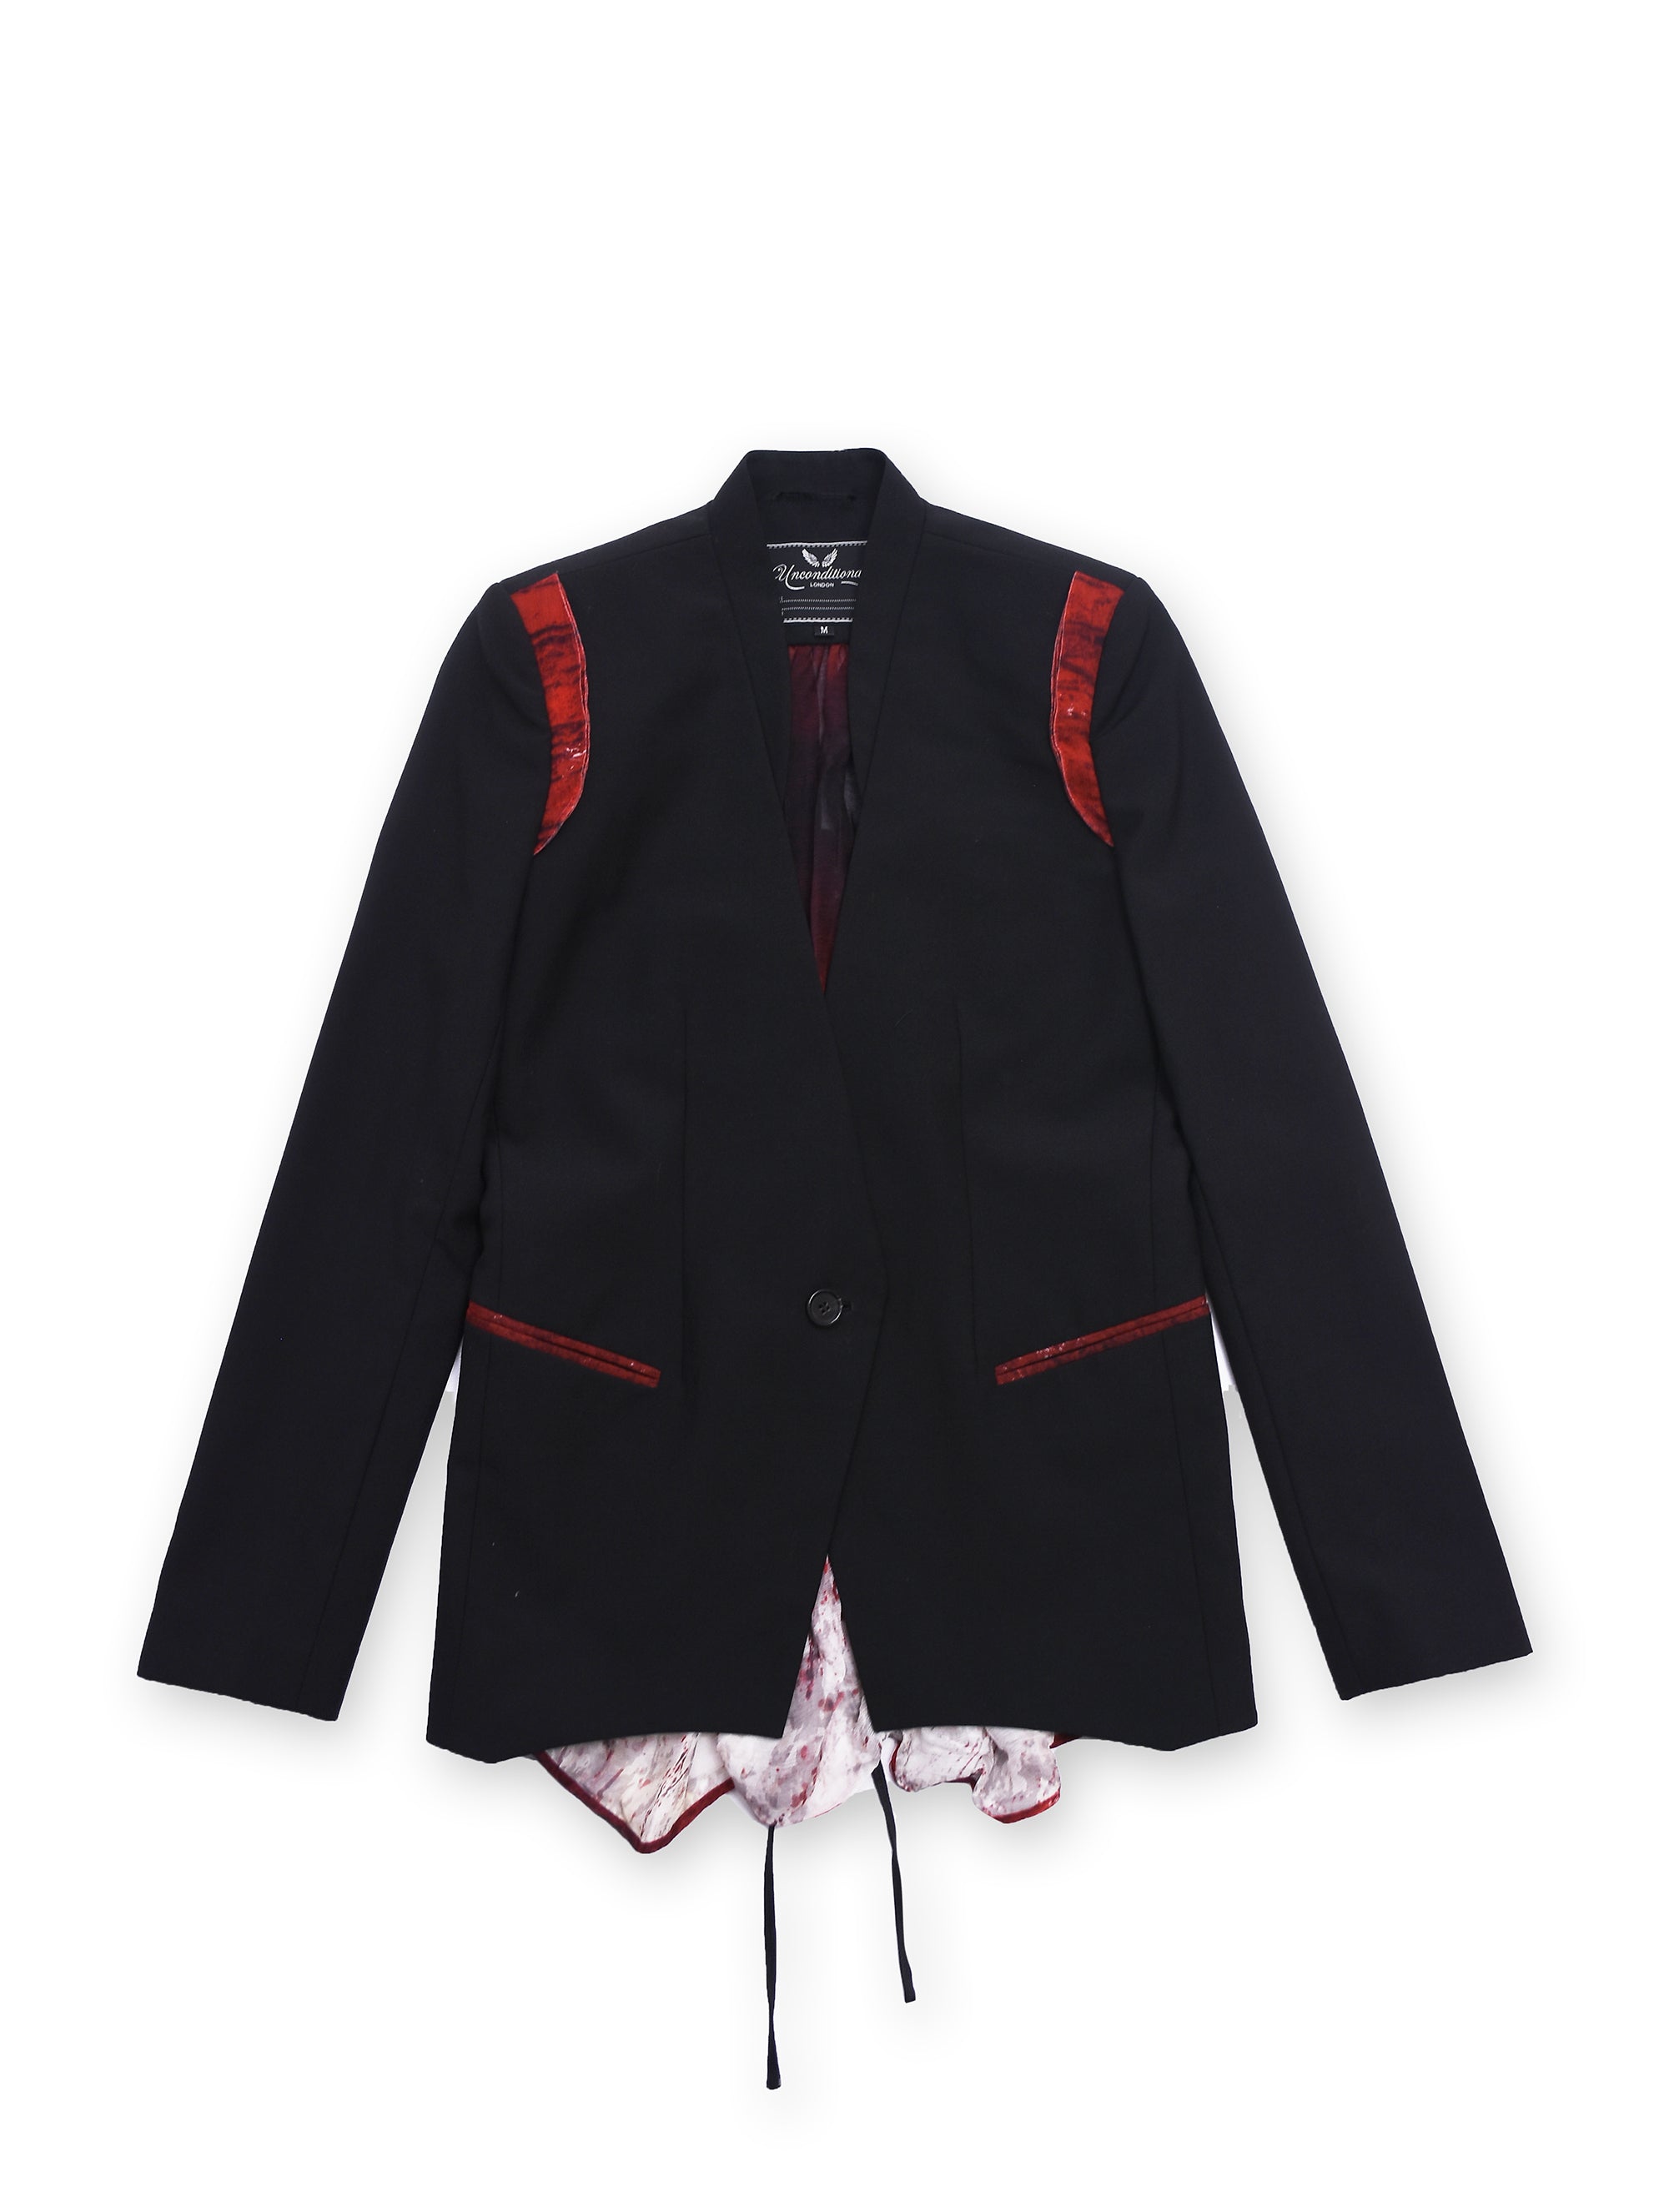 Black Blazer With Corset Back And Contrasting Red And Black Mesh